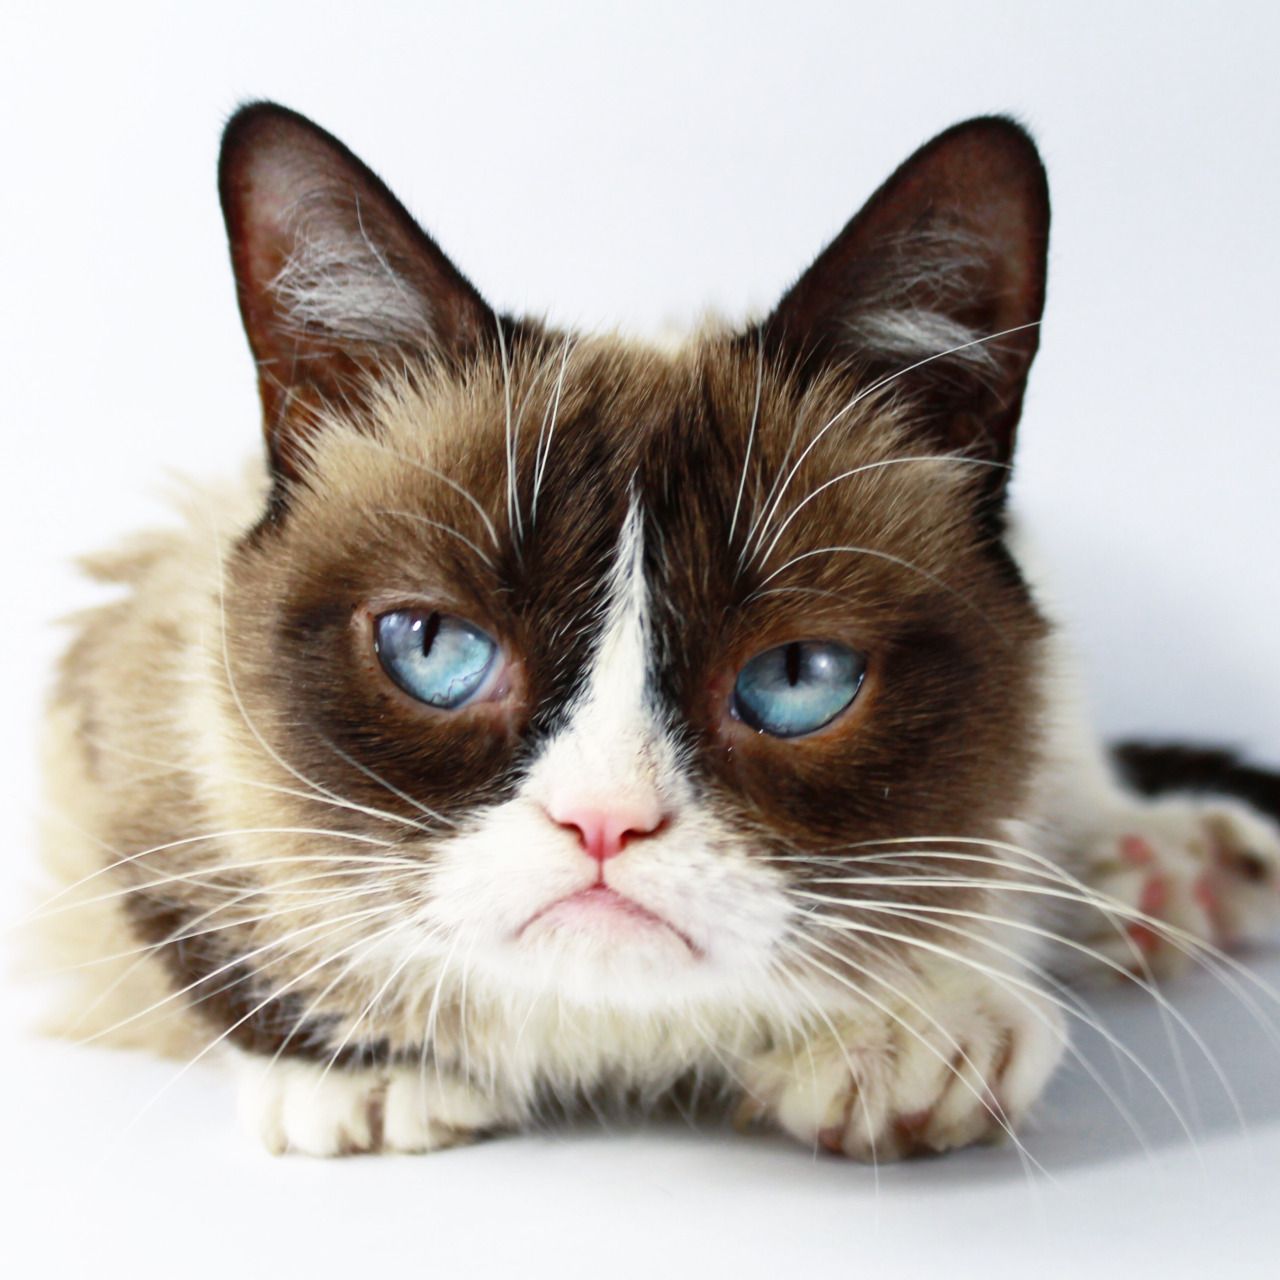 In order to remember the viral legend of Grumpy Cat, we’ve put together a list of the best memes to celebrate her life.